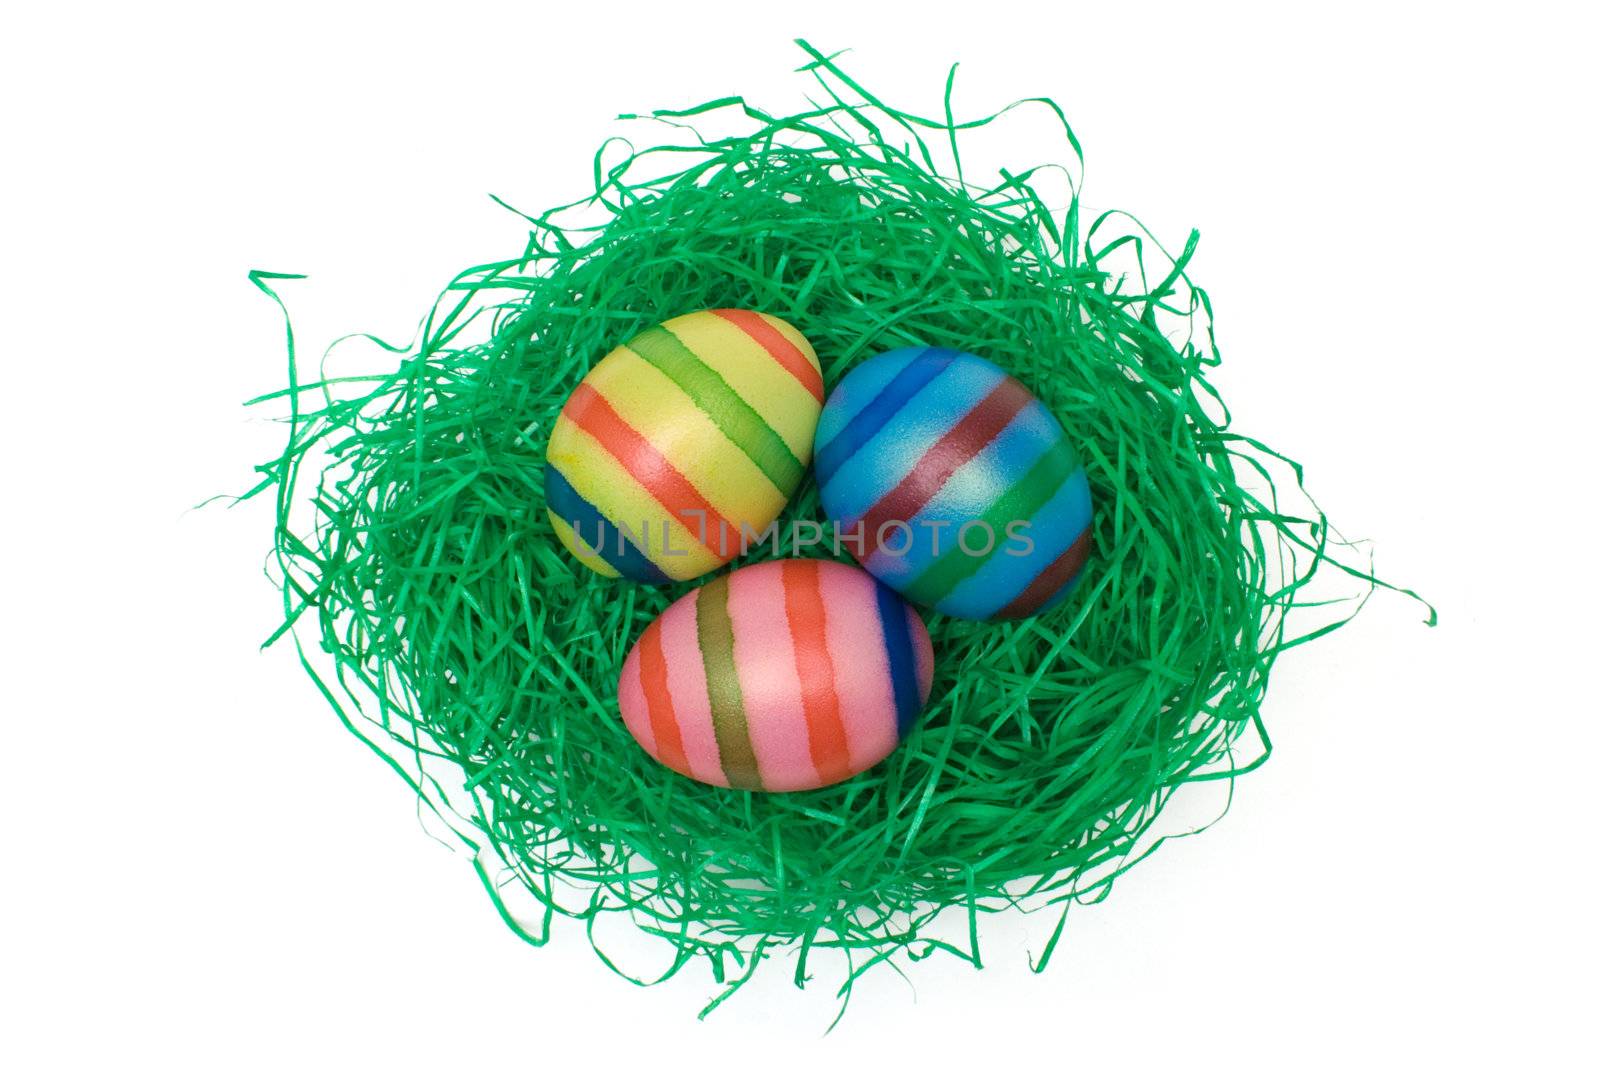 Colored eggs on artificial grass. Isolated on a white background.